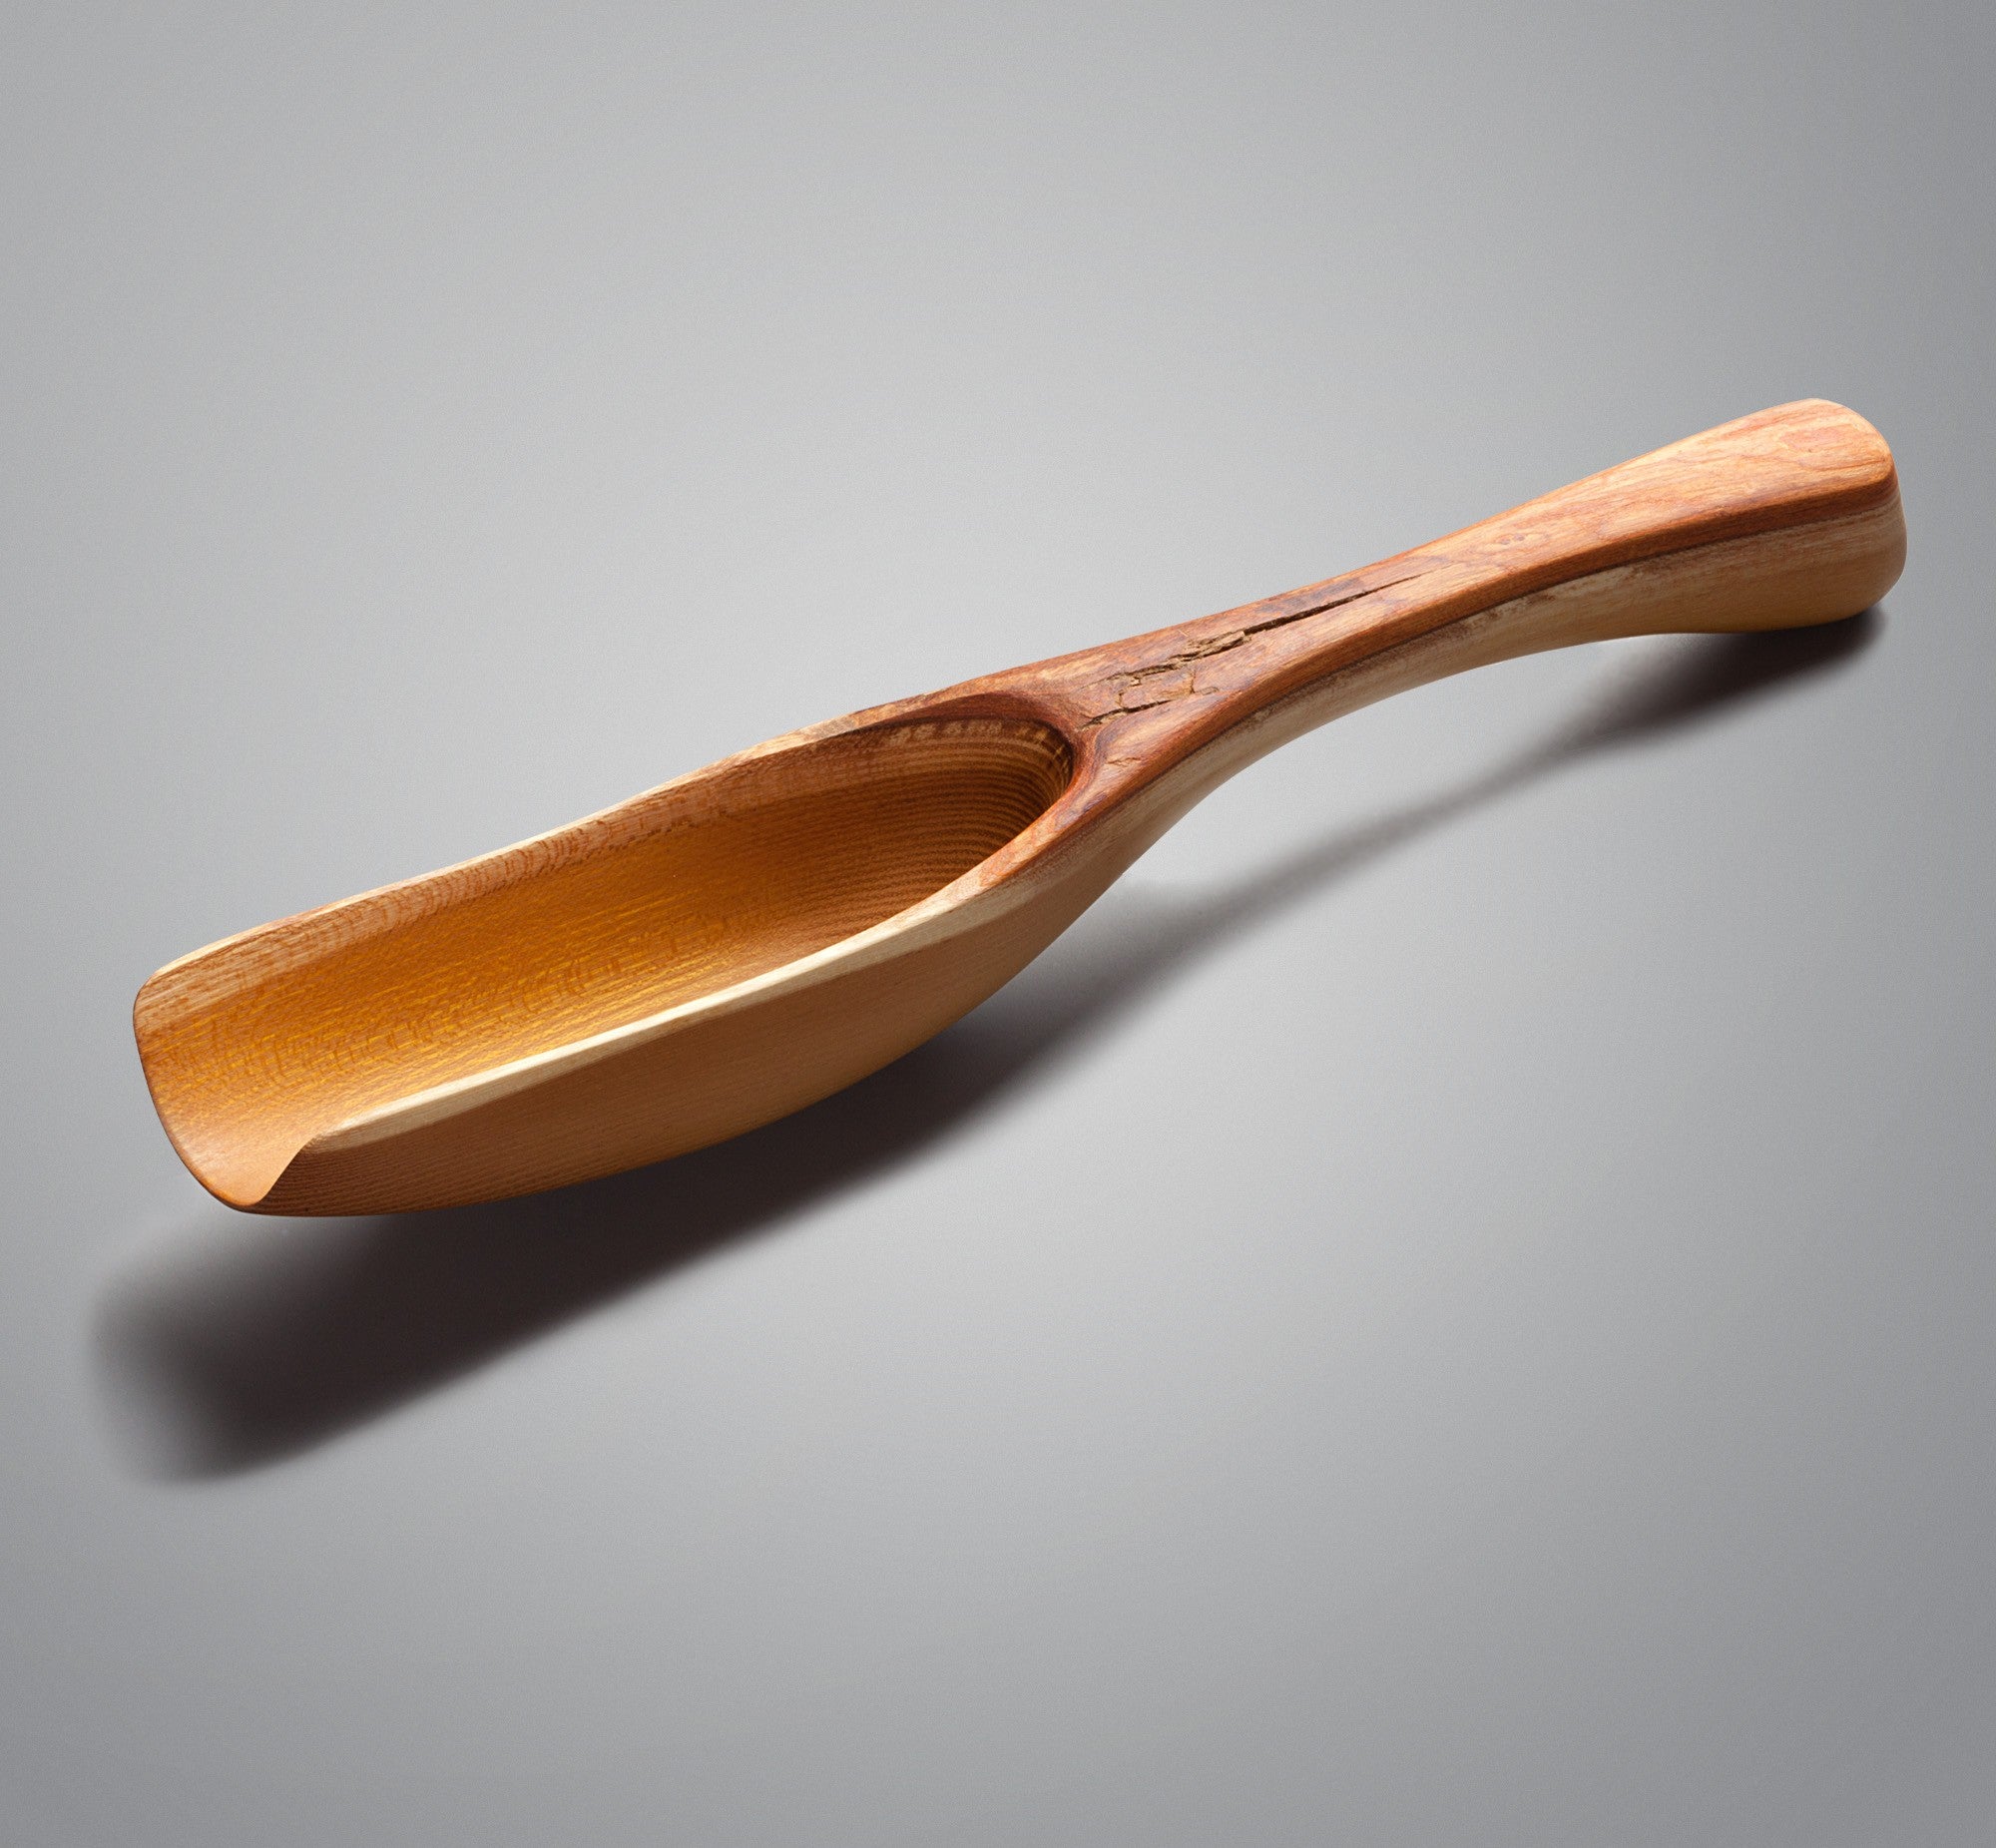 The Osage Scoop